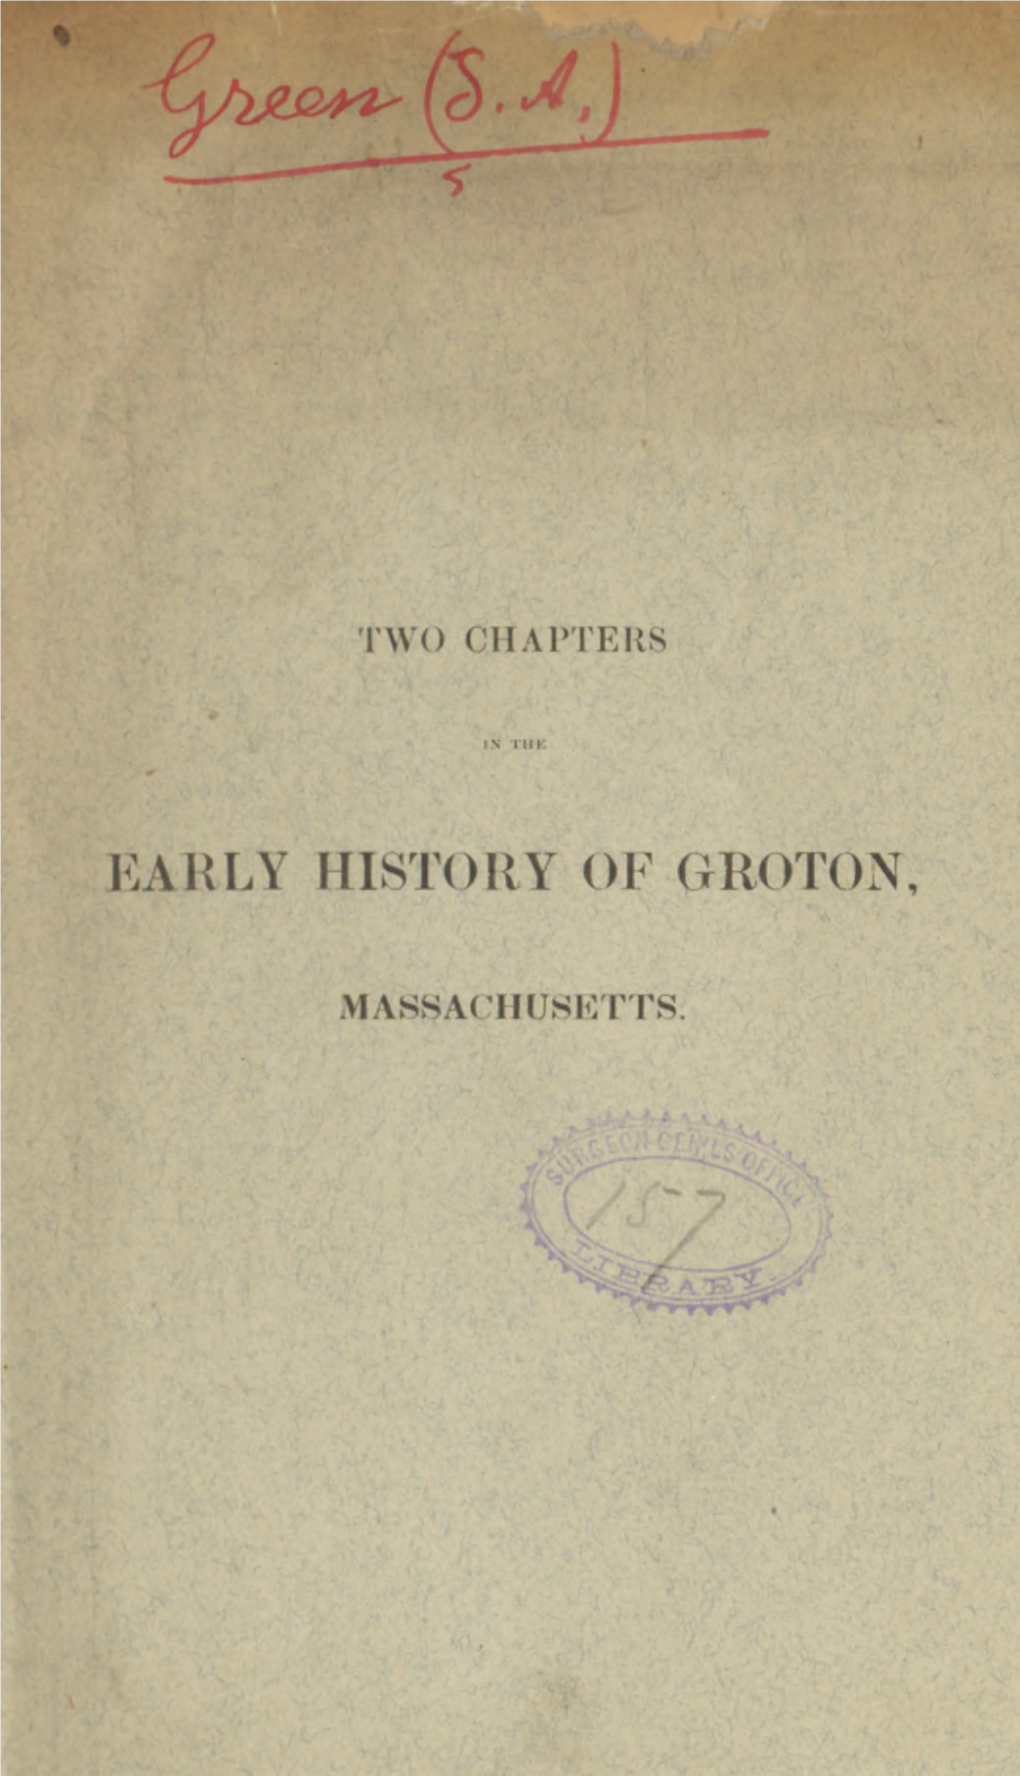 Two Chapters in the Early History of Groton, Massachusetts